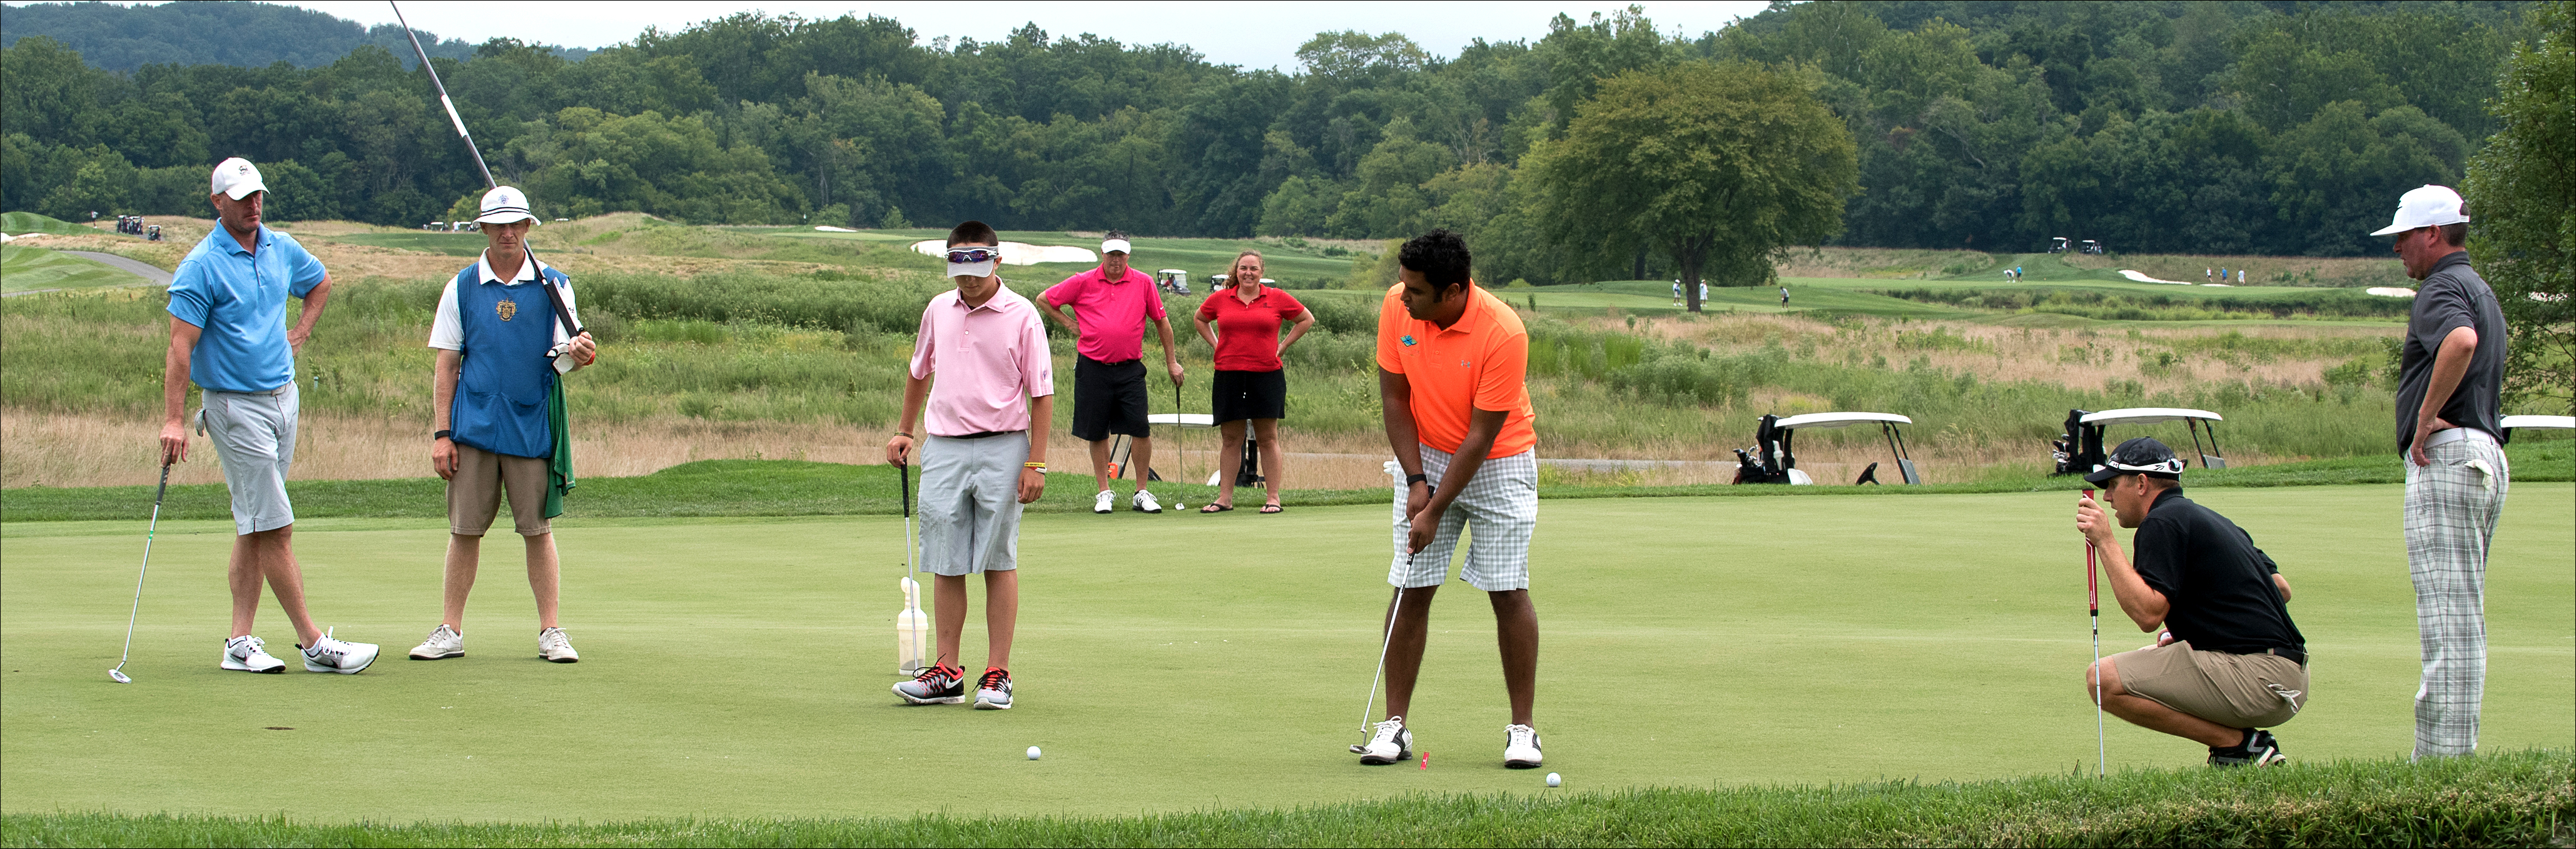 Golfers at YouthQuest's 10th Annual Challenge at Trump National Golf Club August 10, 2015